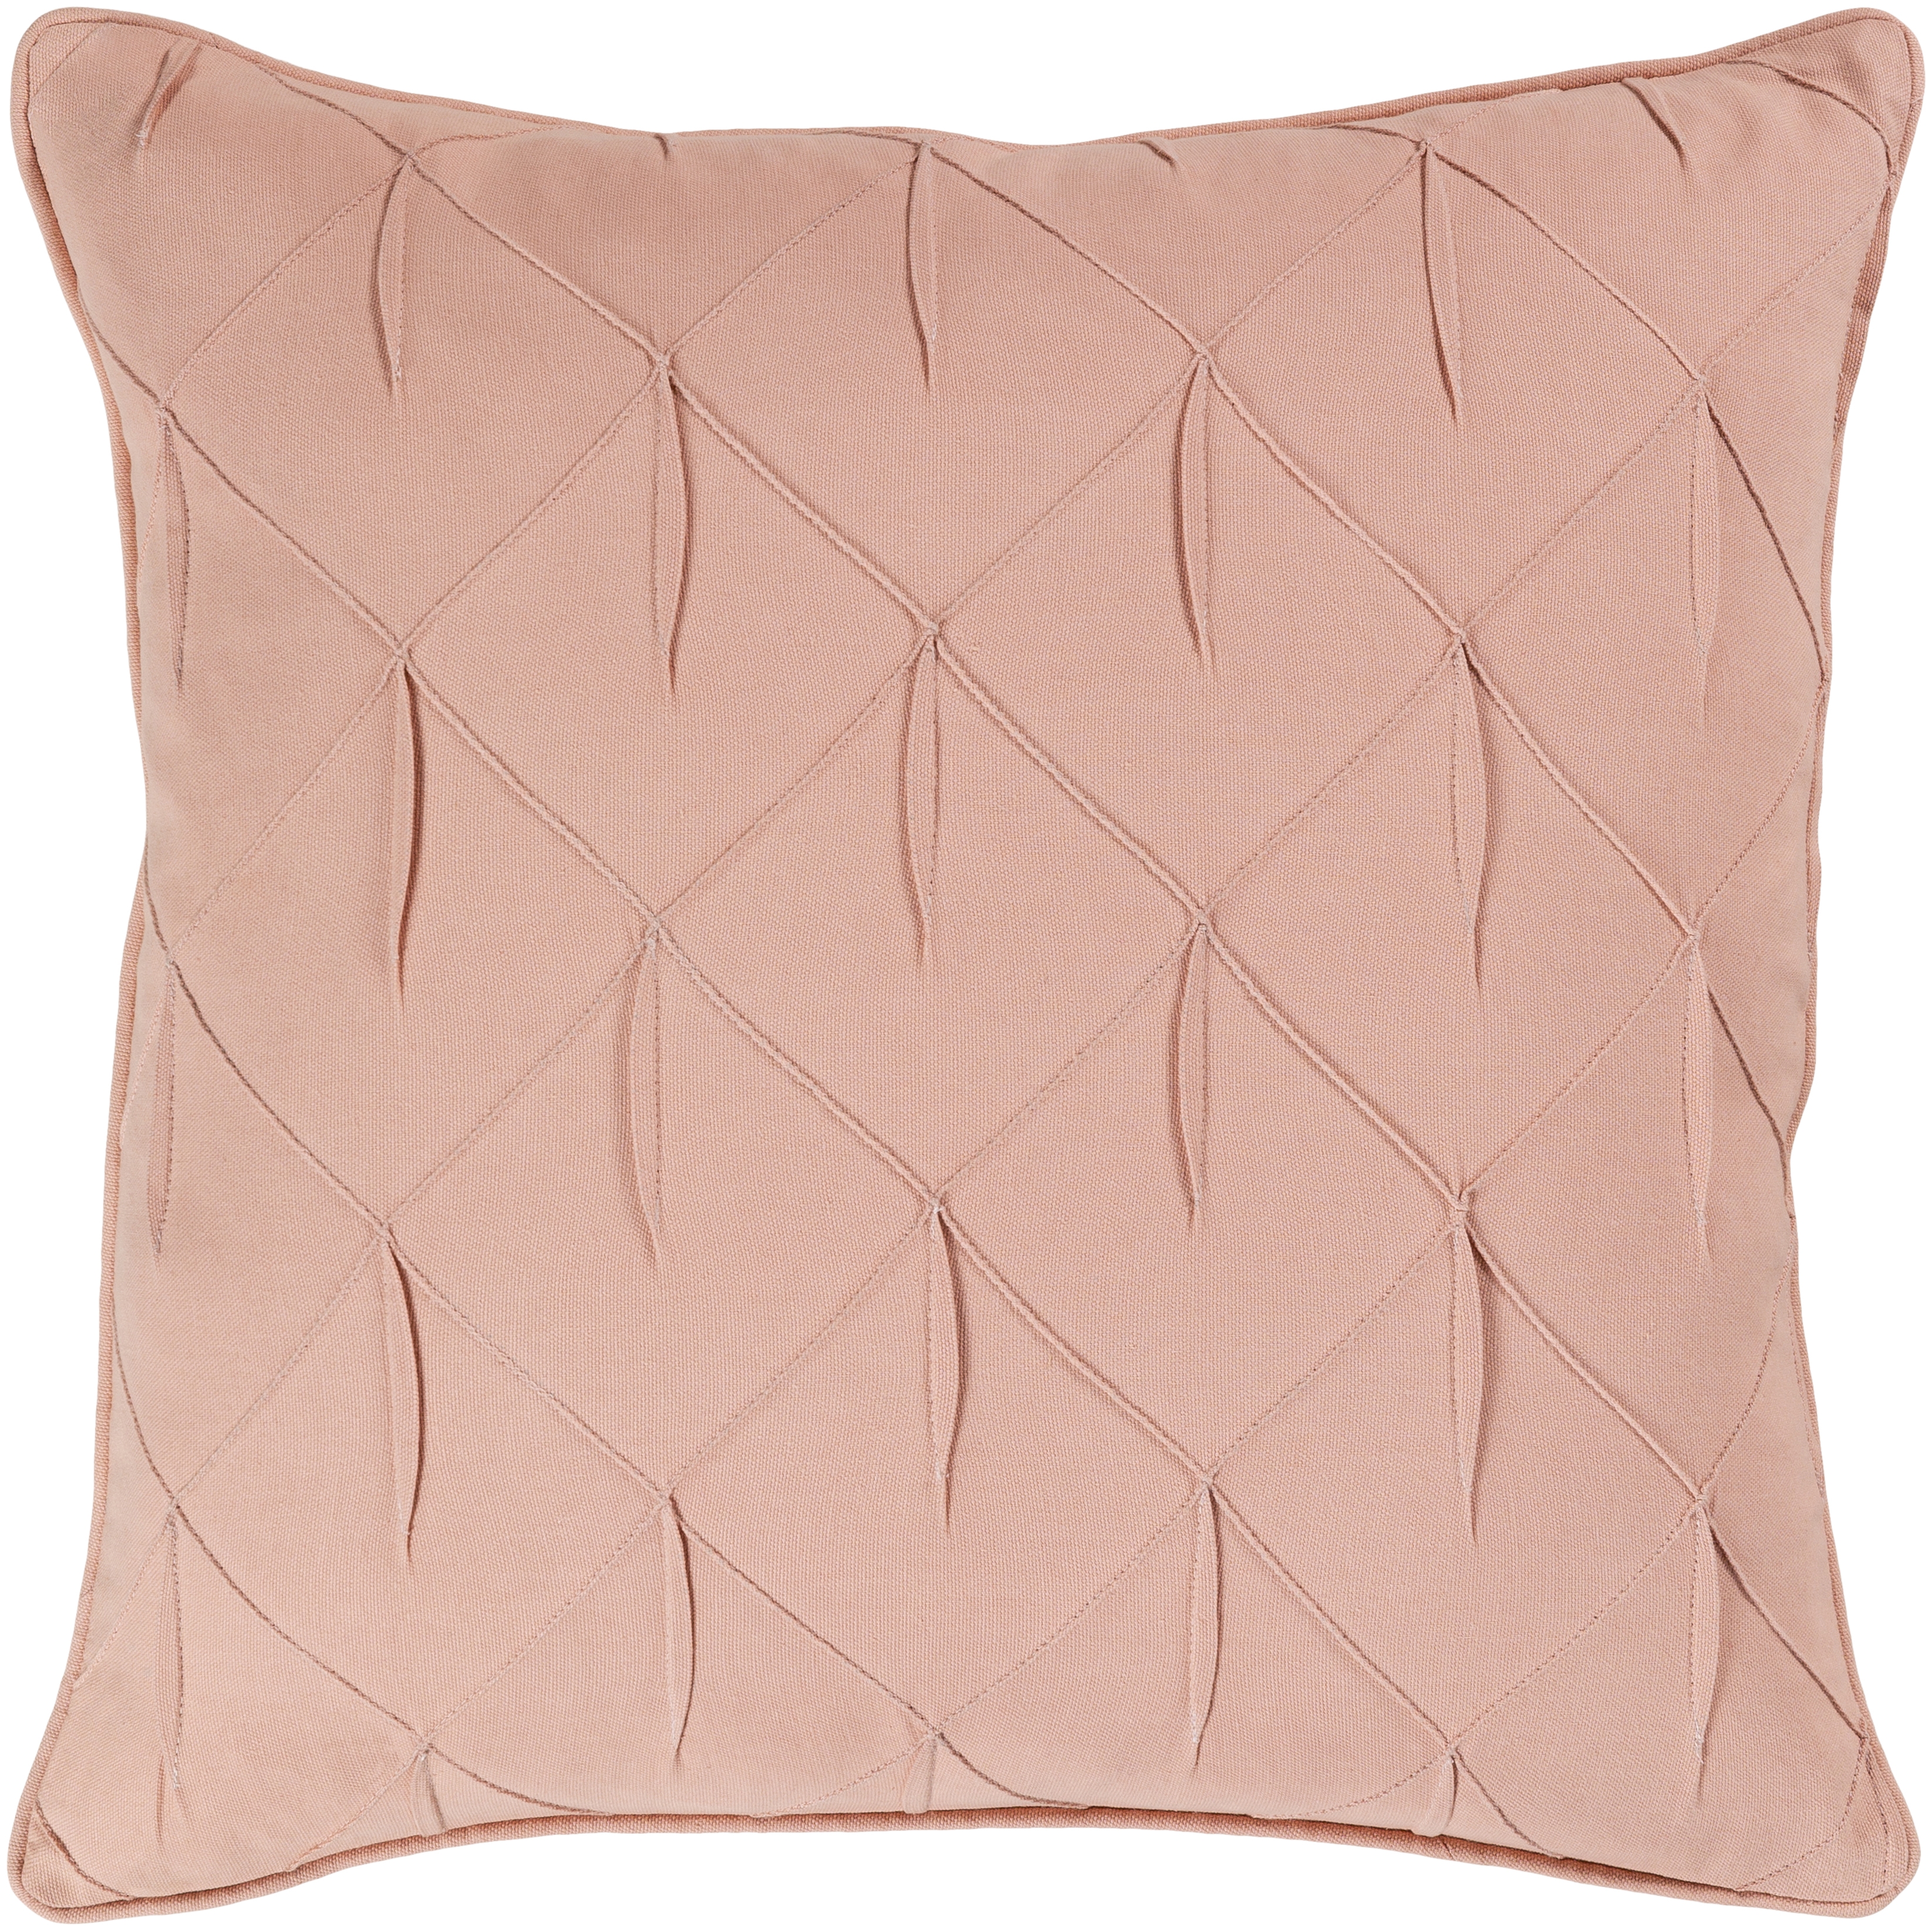 Gretchen Throw Pillow, 20" x 20", with down insert - Image 0